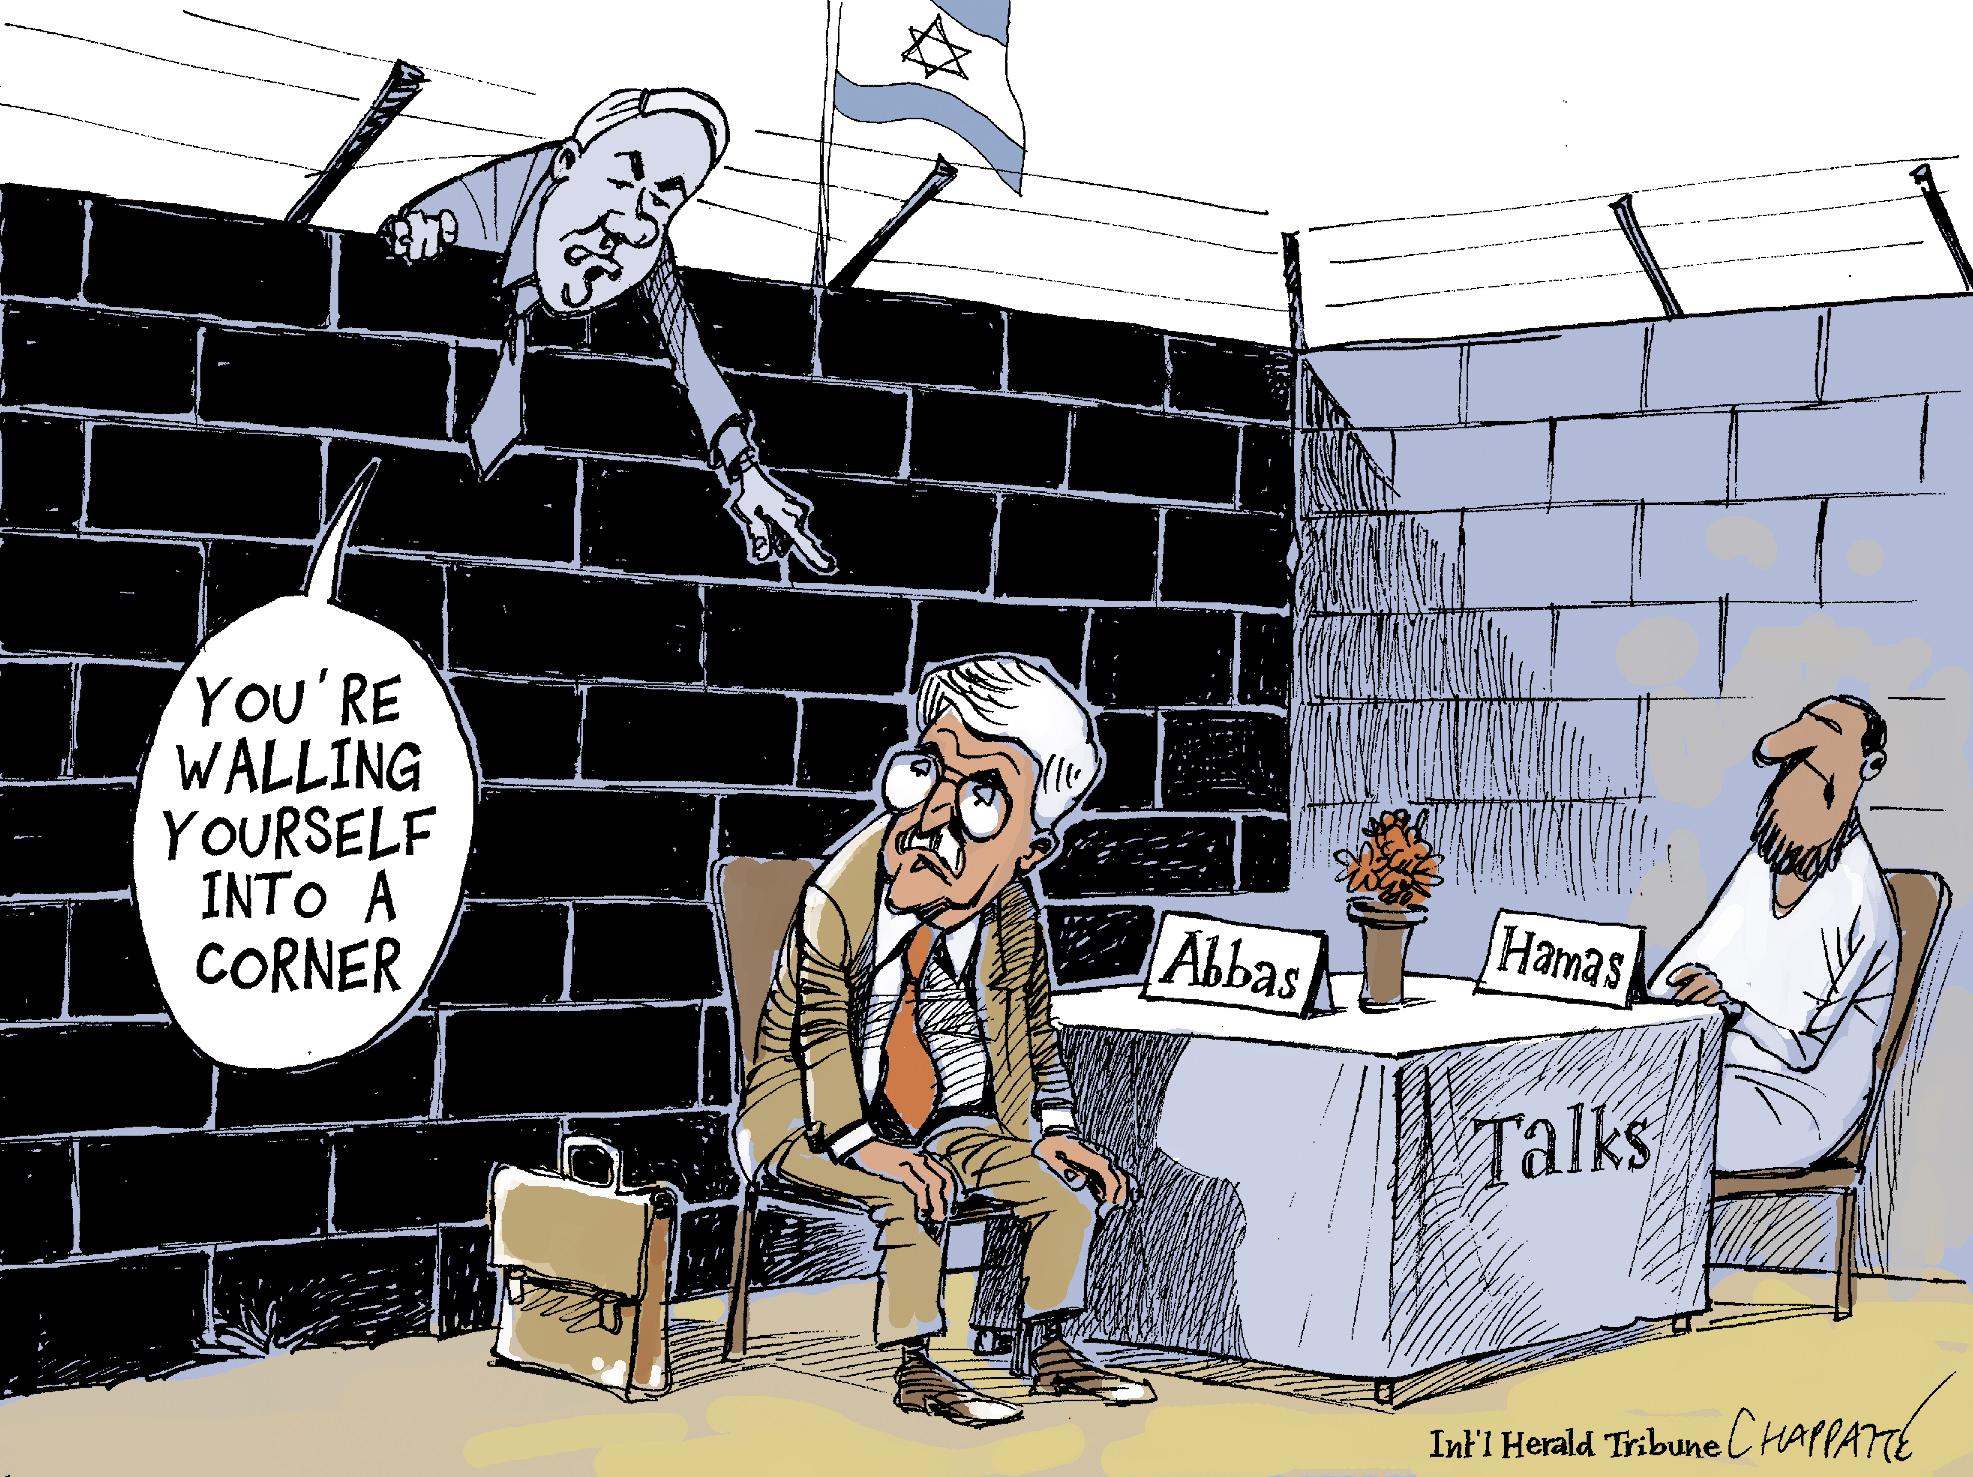 Reconciliation between Fatah and Hamas